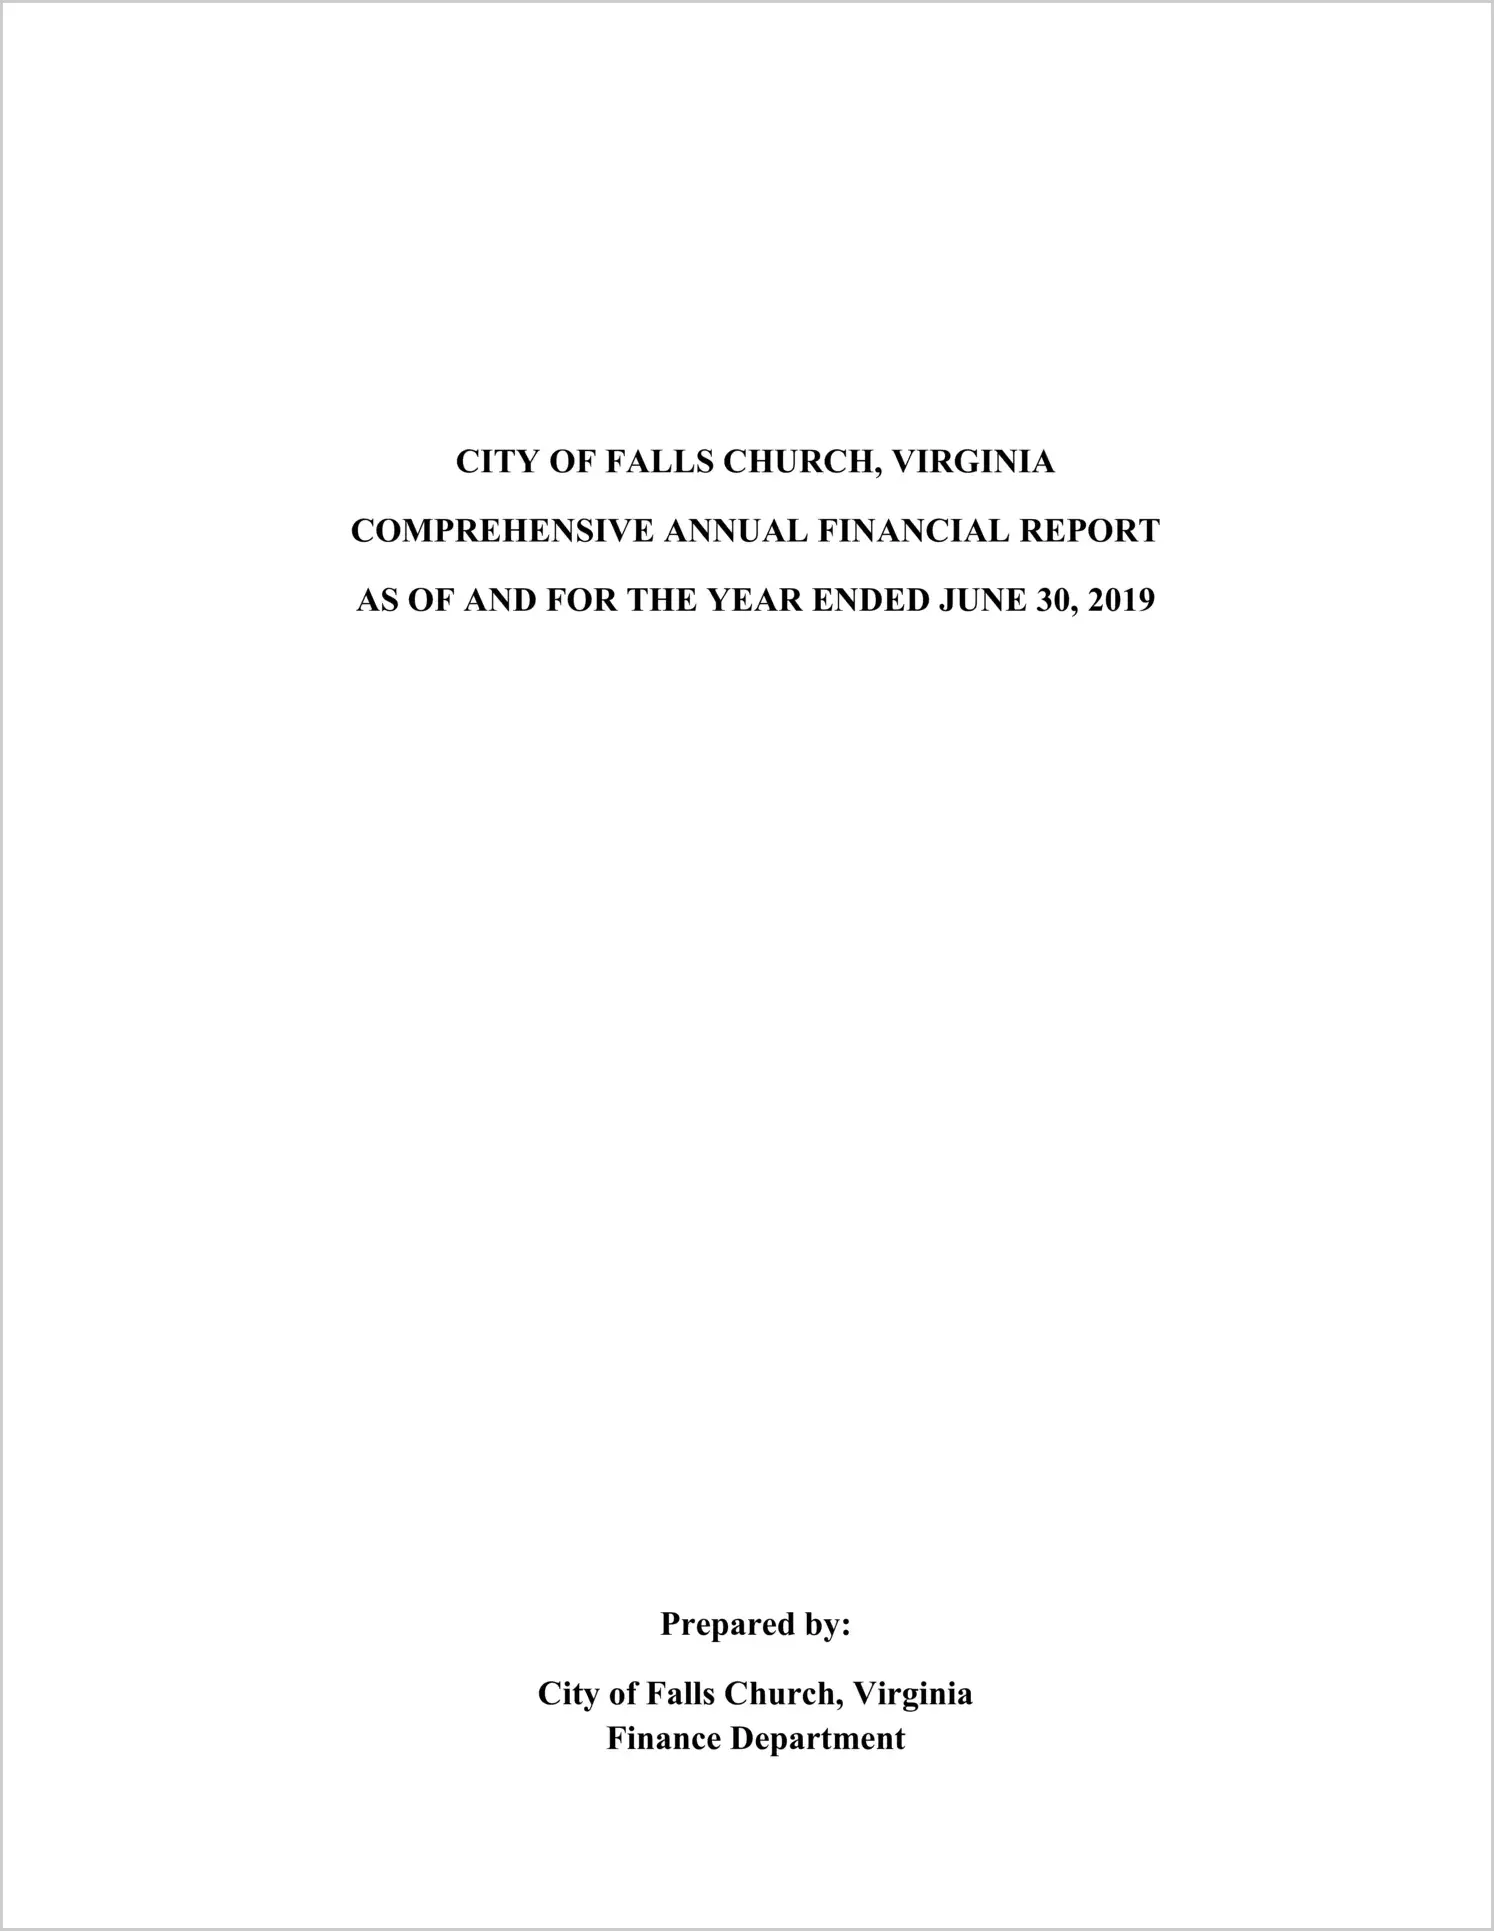 2019 Annual Financial Report for City of Falls Church